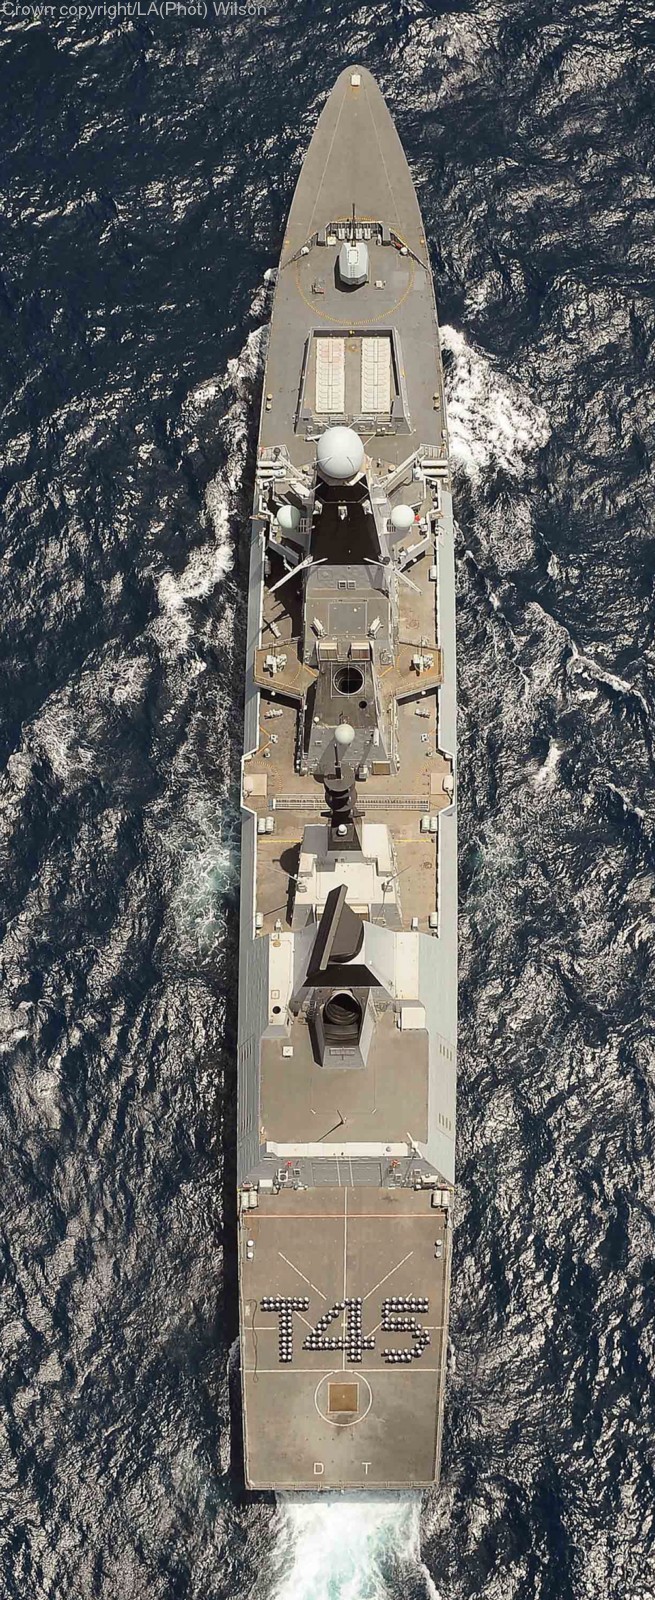 hms dauntless d-33 type 45 daring class guided missile destroyer royal navy sea viper paams 10